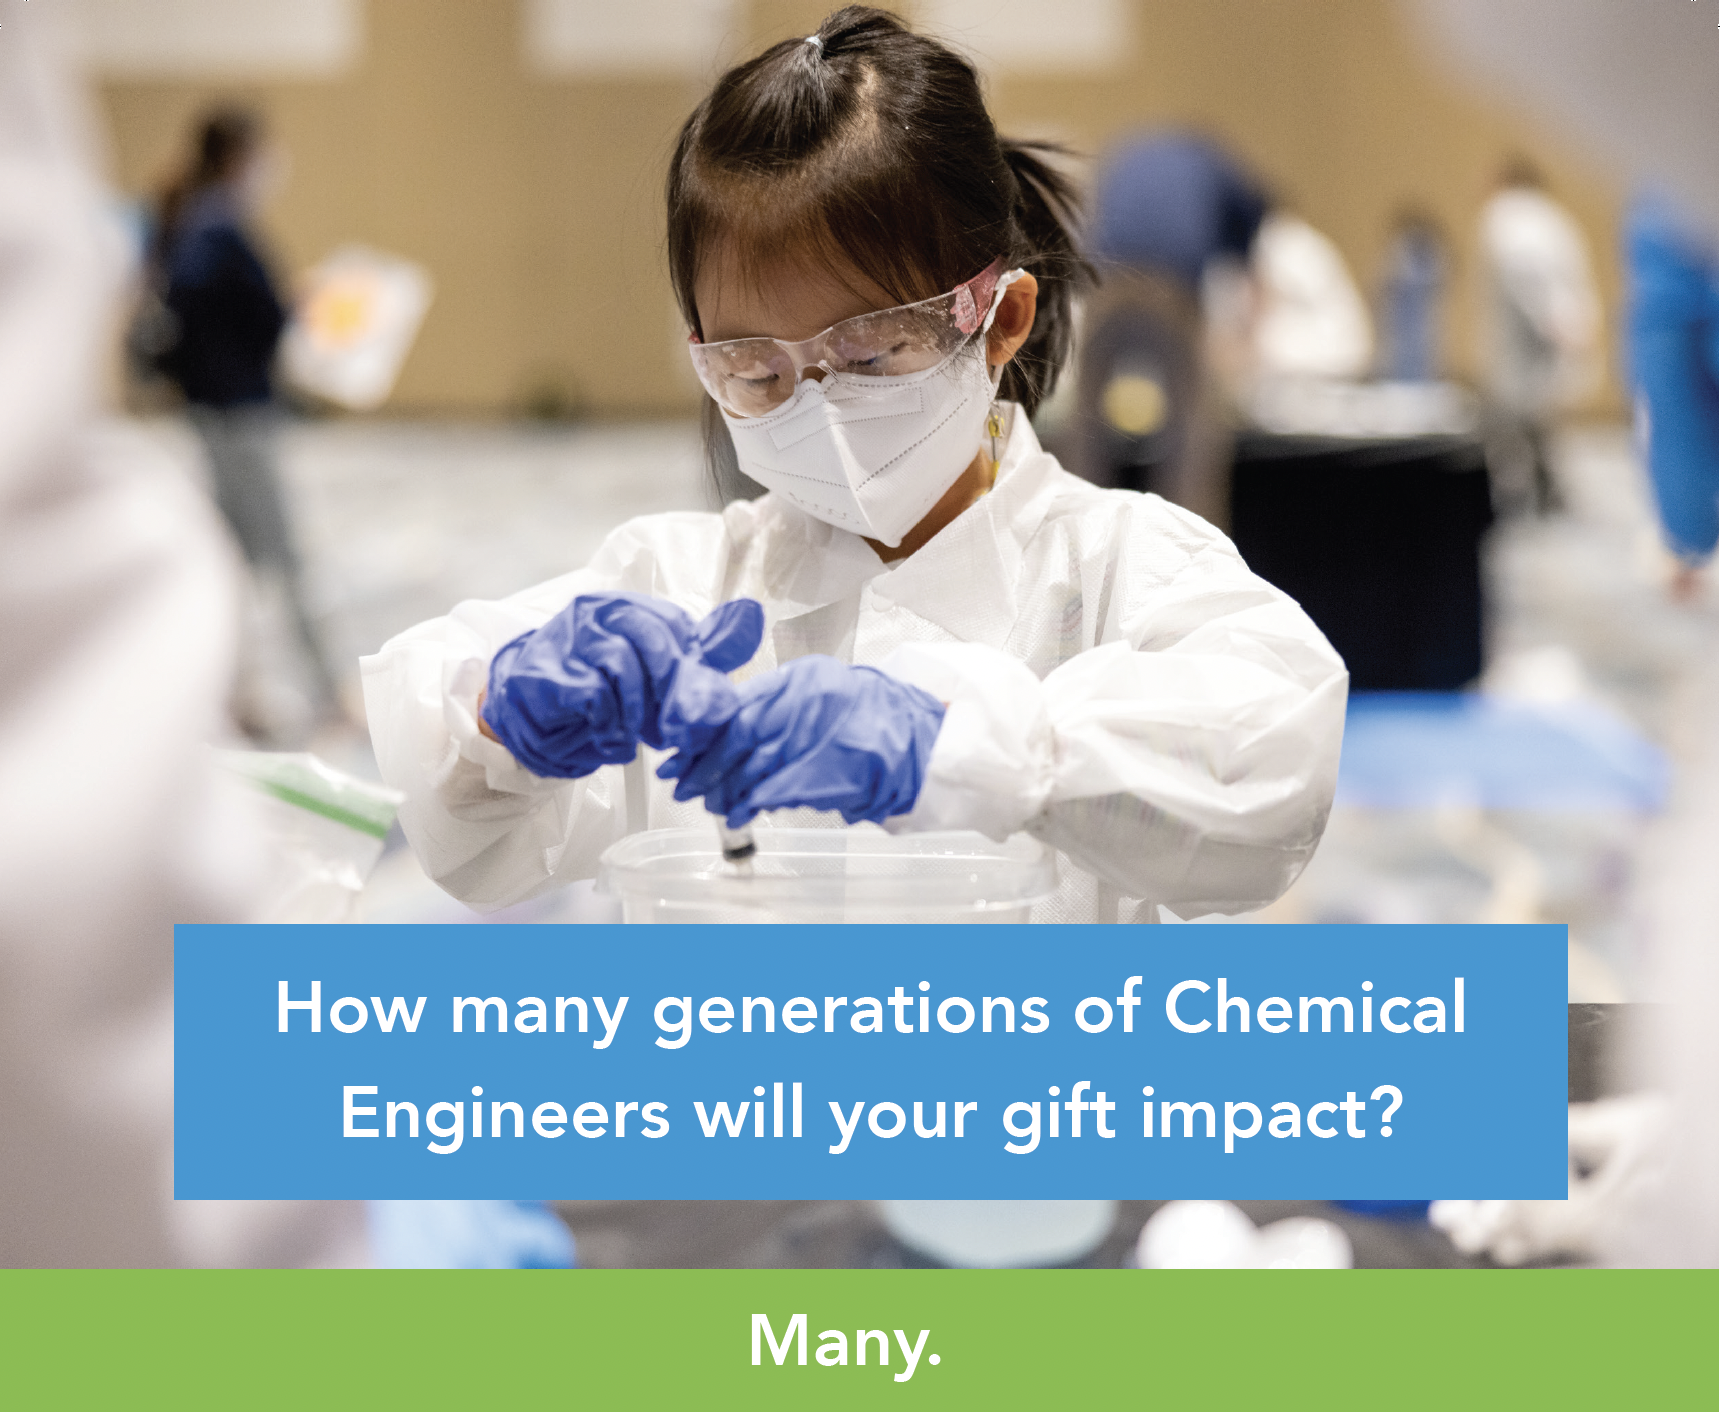 How many generations of Chemical Engineers will your gift impact?